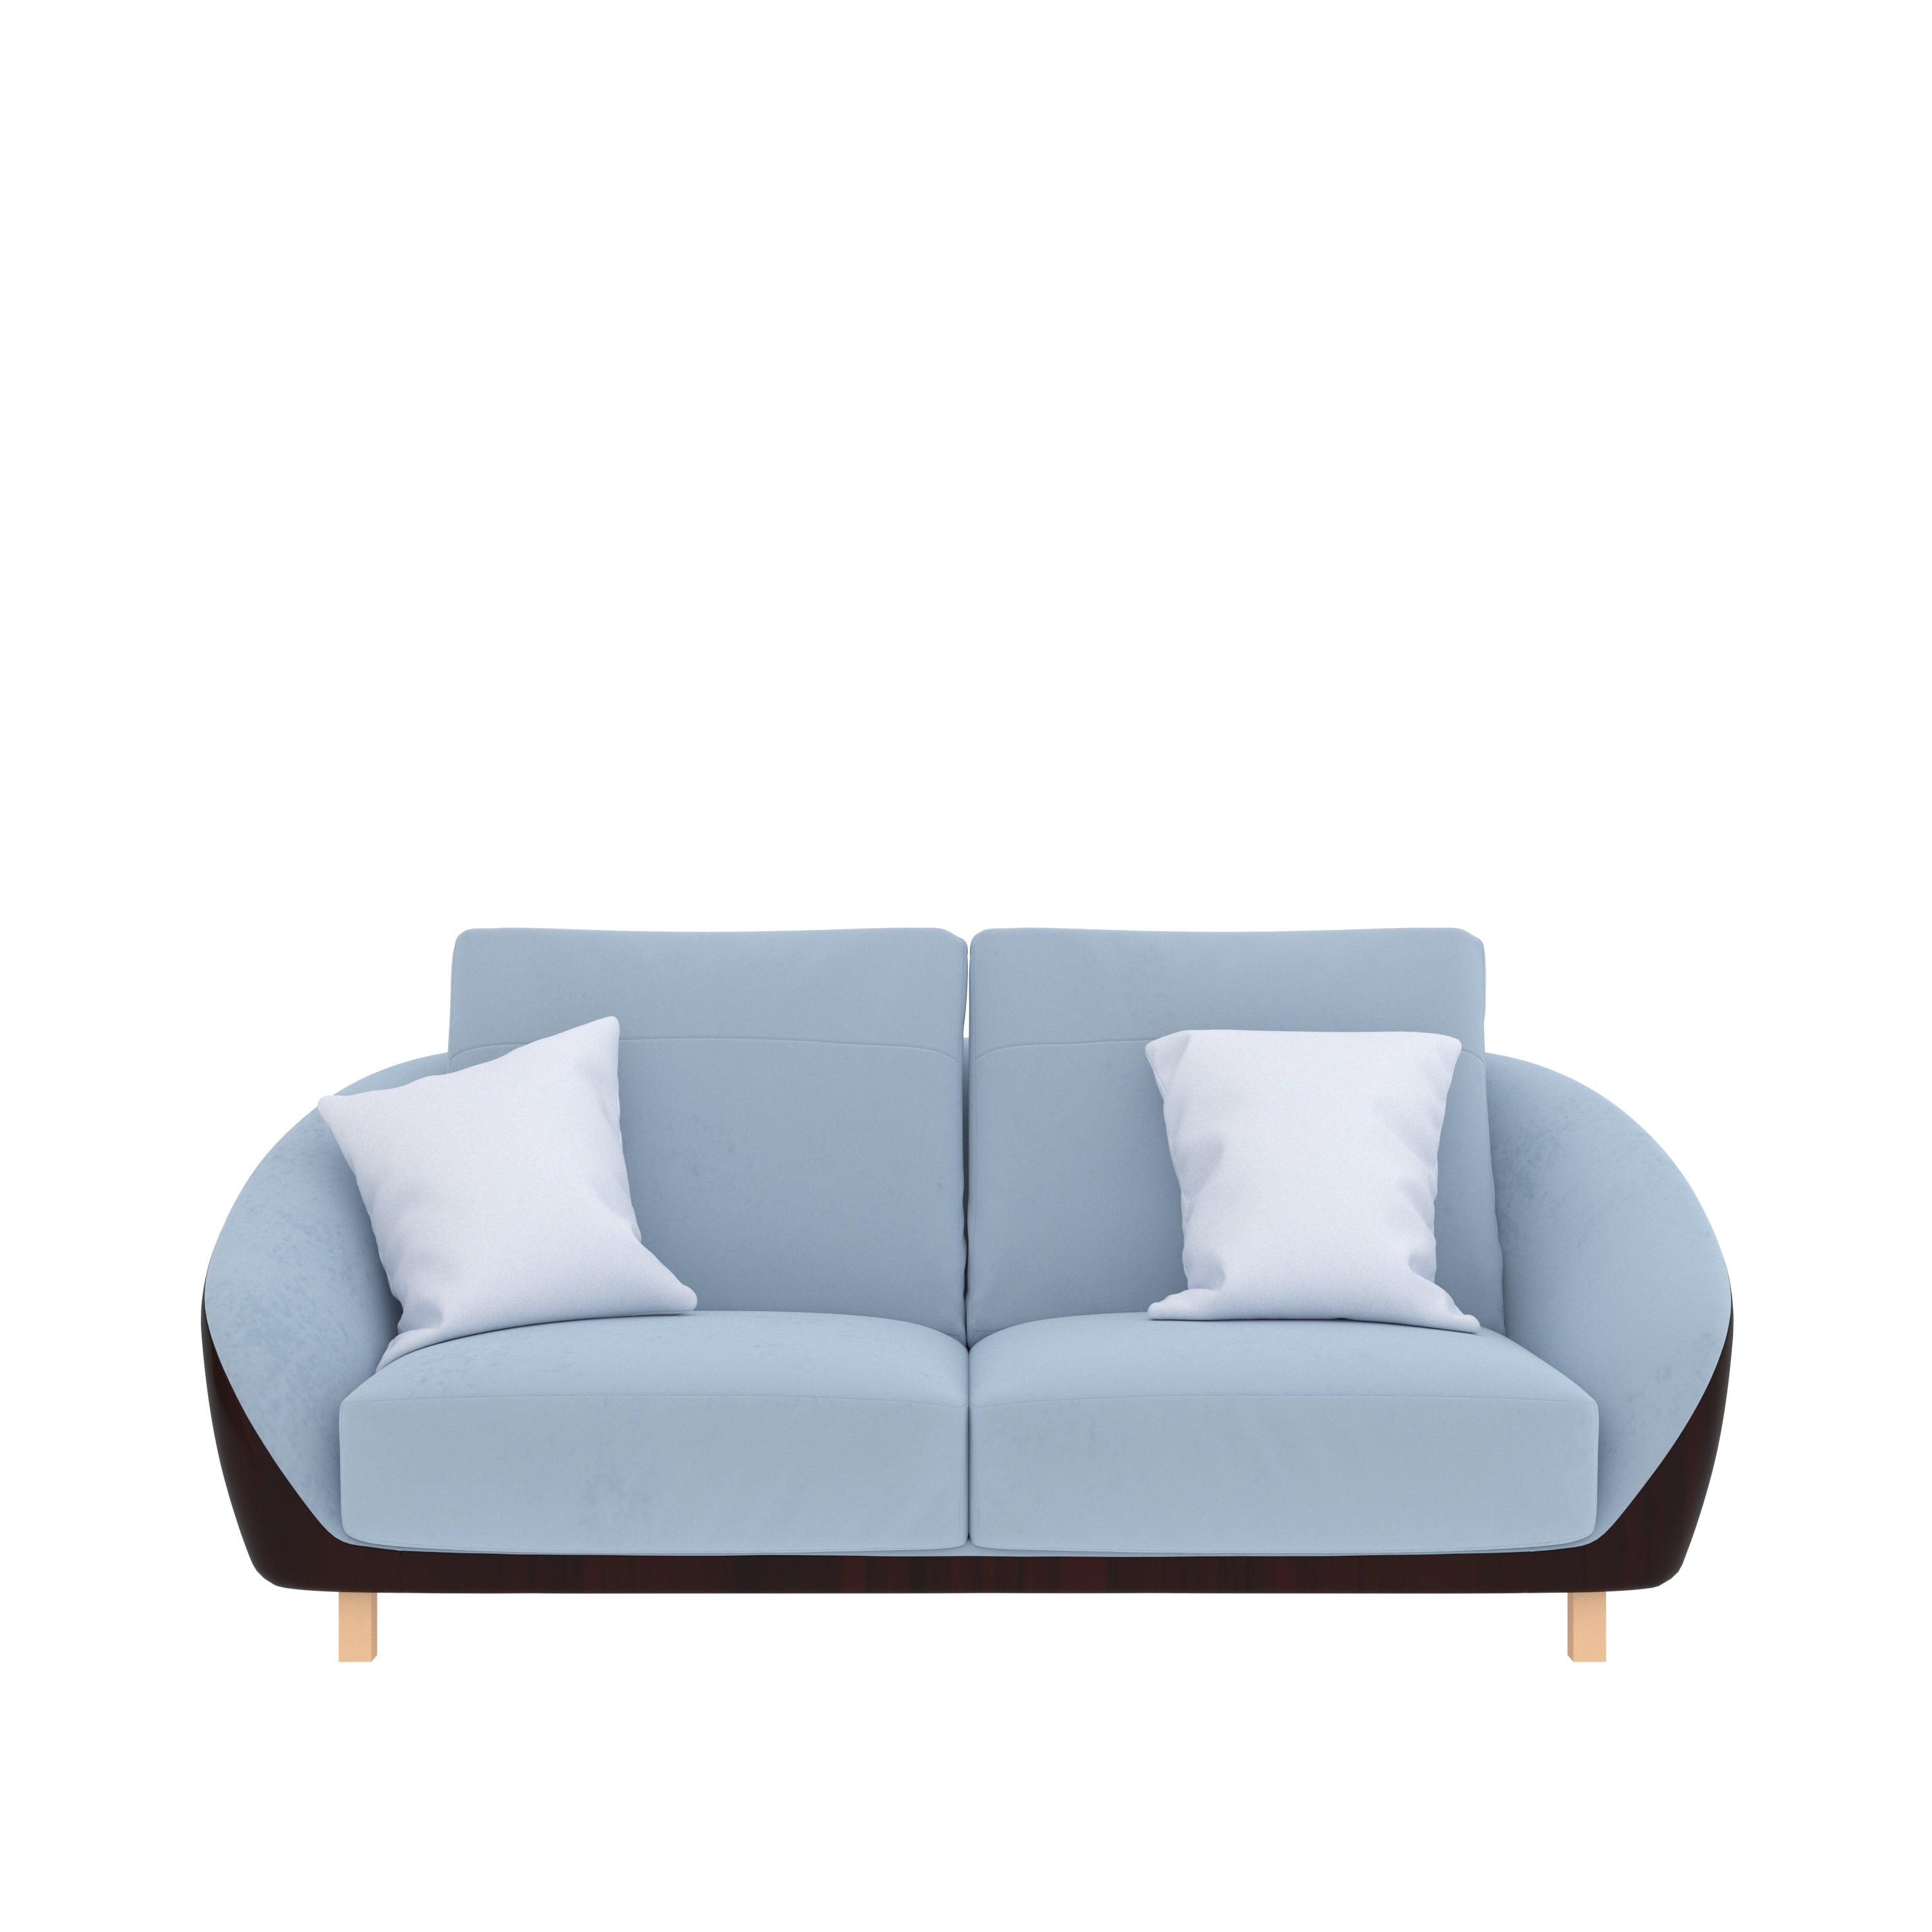 Air-Force Blue Smooth Finish Wooden 2 Seater Sofa Sofa